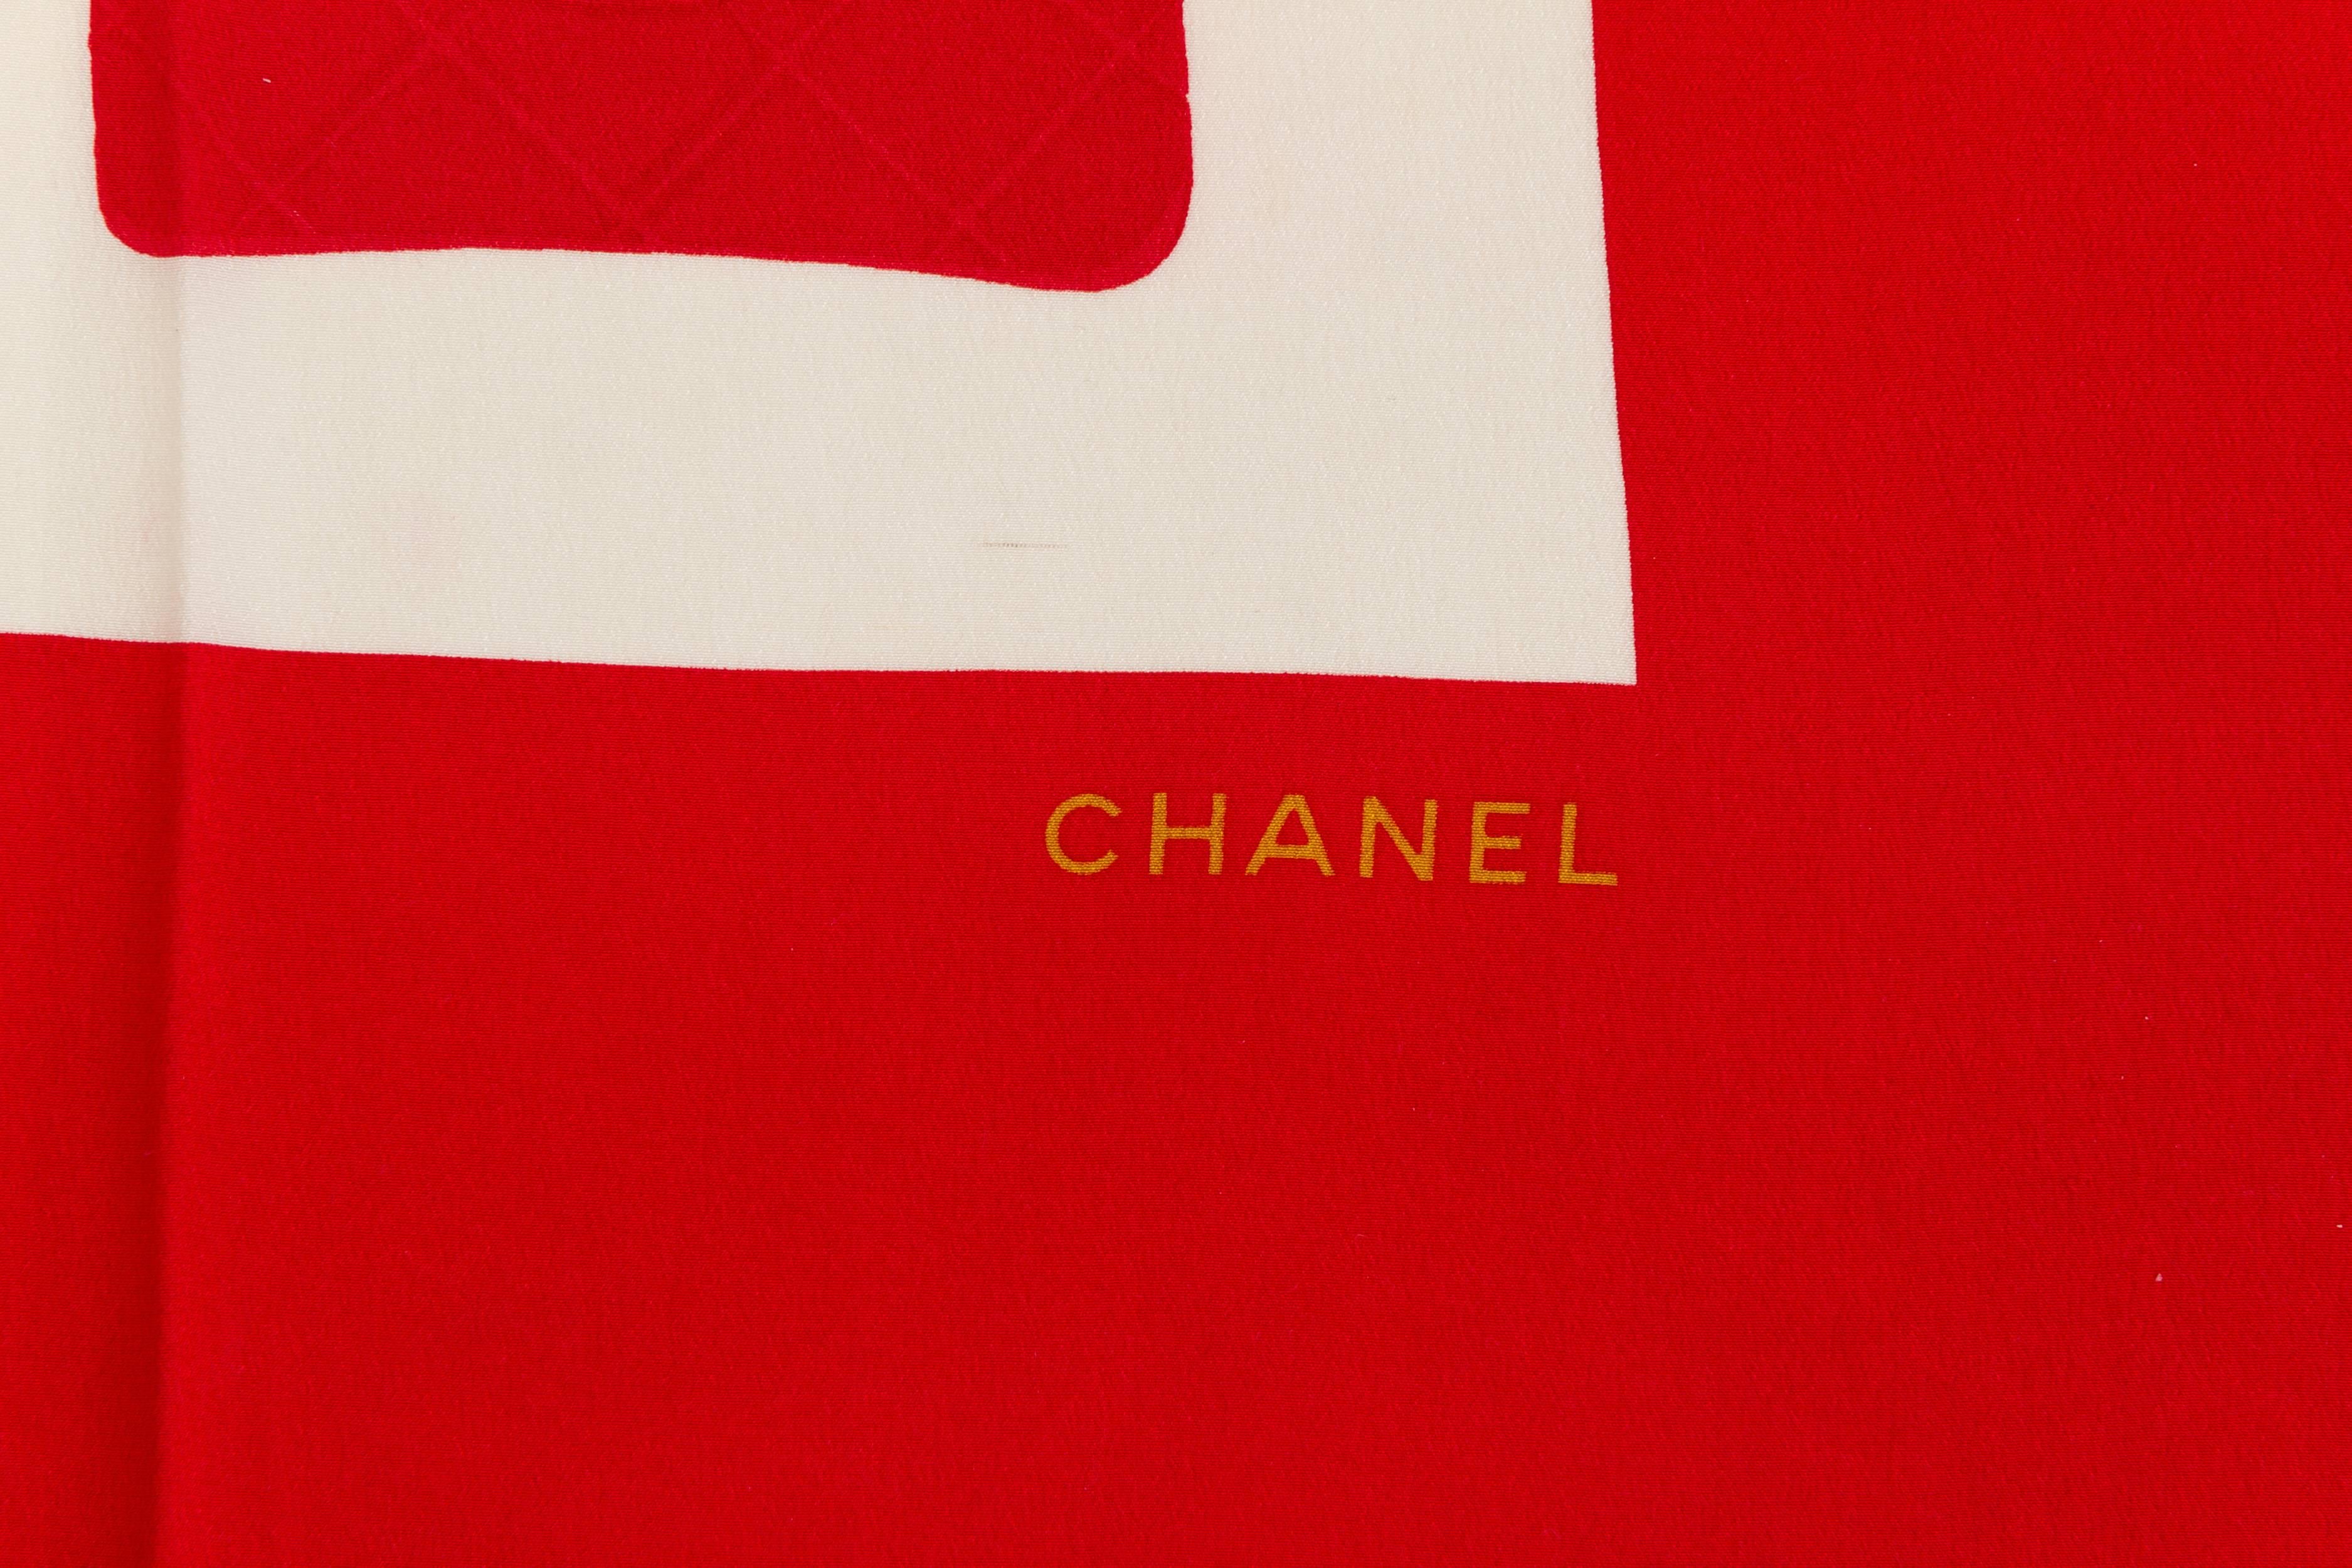 Chanel 90's collection 100% pure silk scarf with classic flap purse design. Hand rolled edges. Does not include box. 